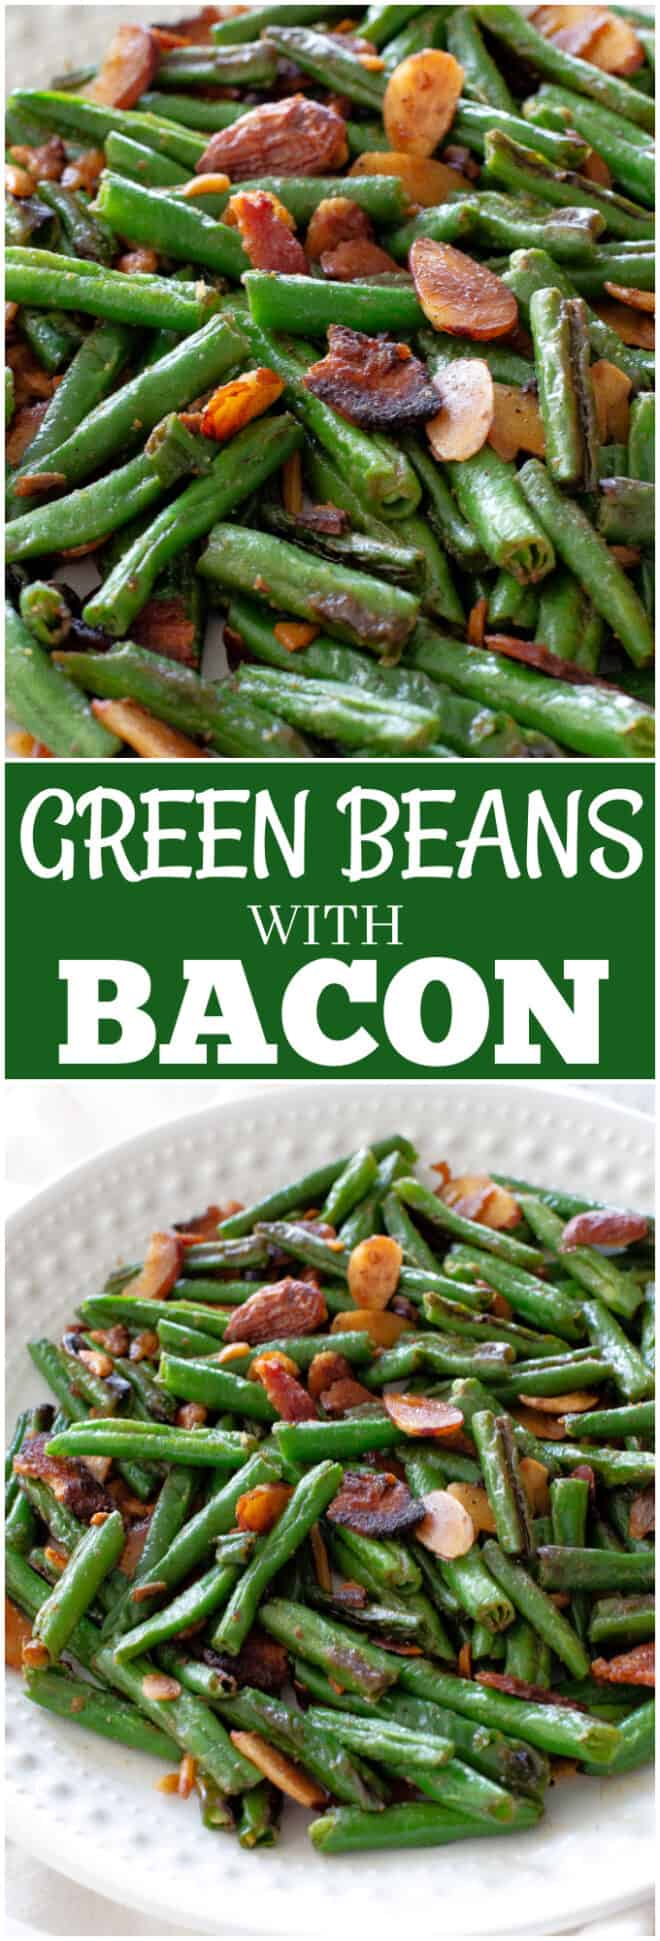 Green Beans with Bacon | The Girl Who Ate Everything